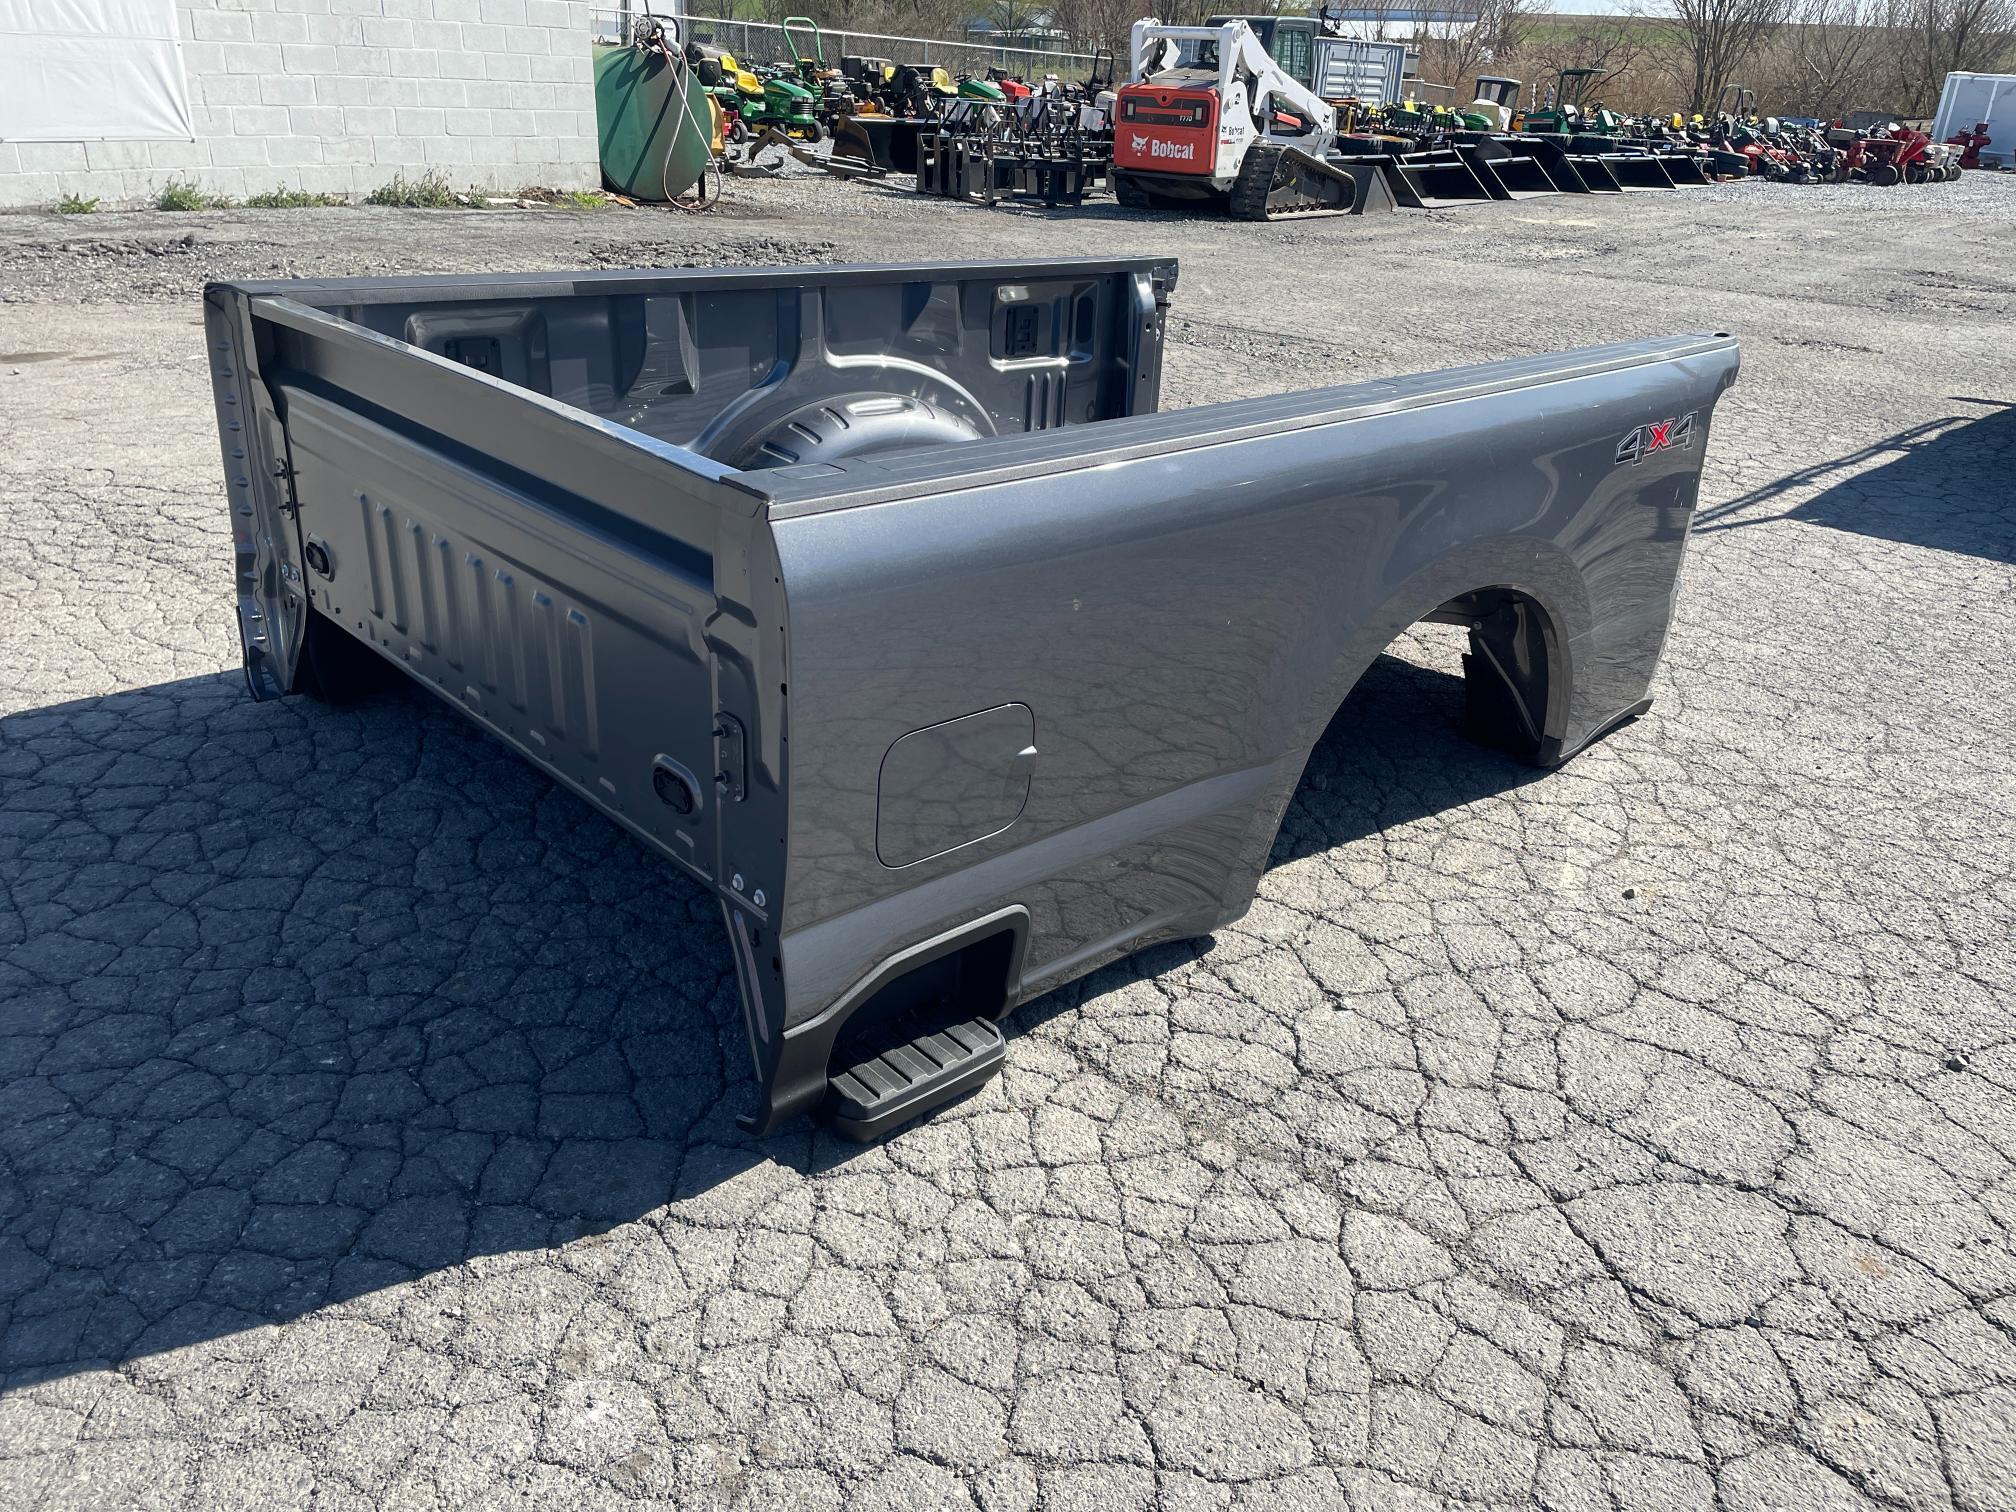 New Ford 8' Truck Bed